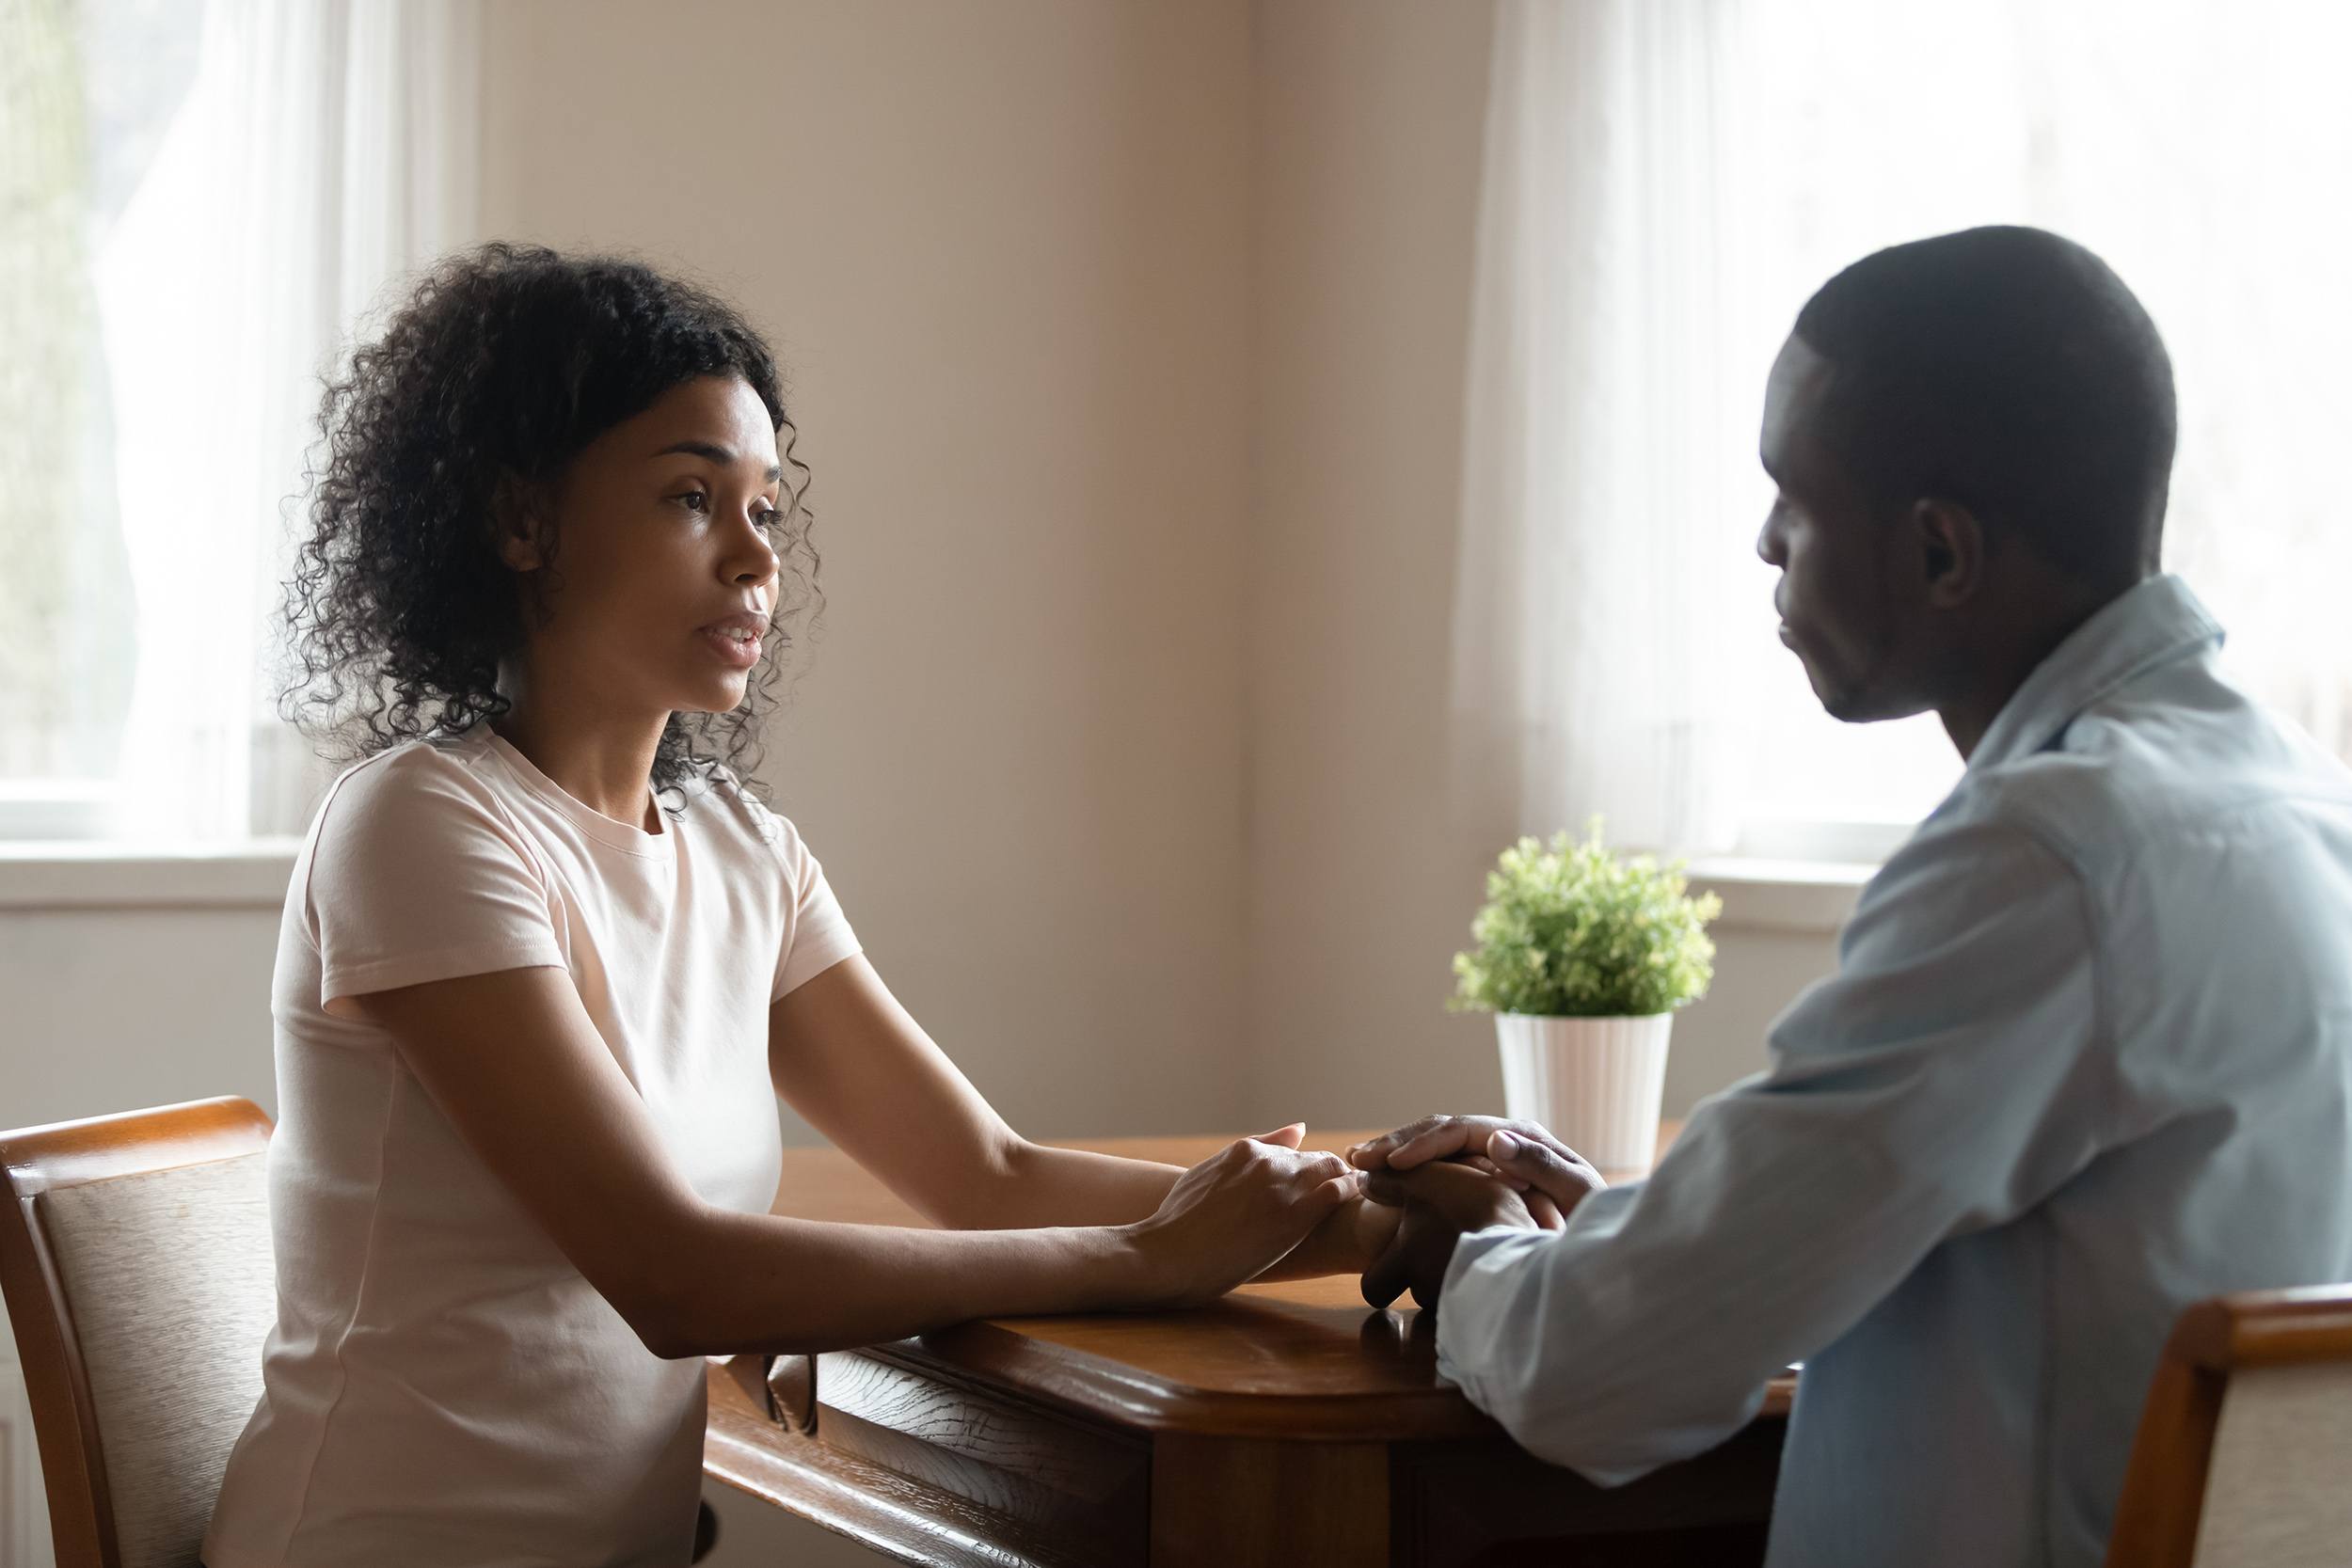 How Can I Convince My Partner To Attend Relationship Counselling With Me?